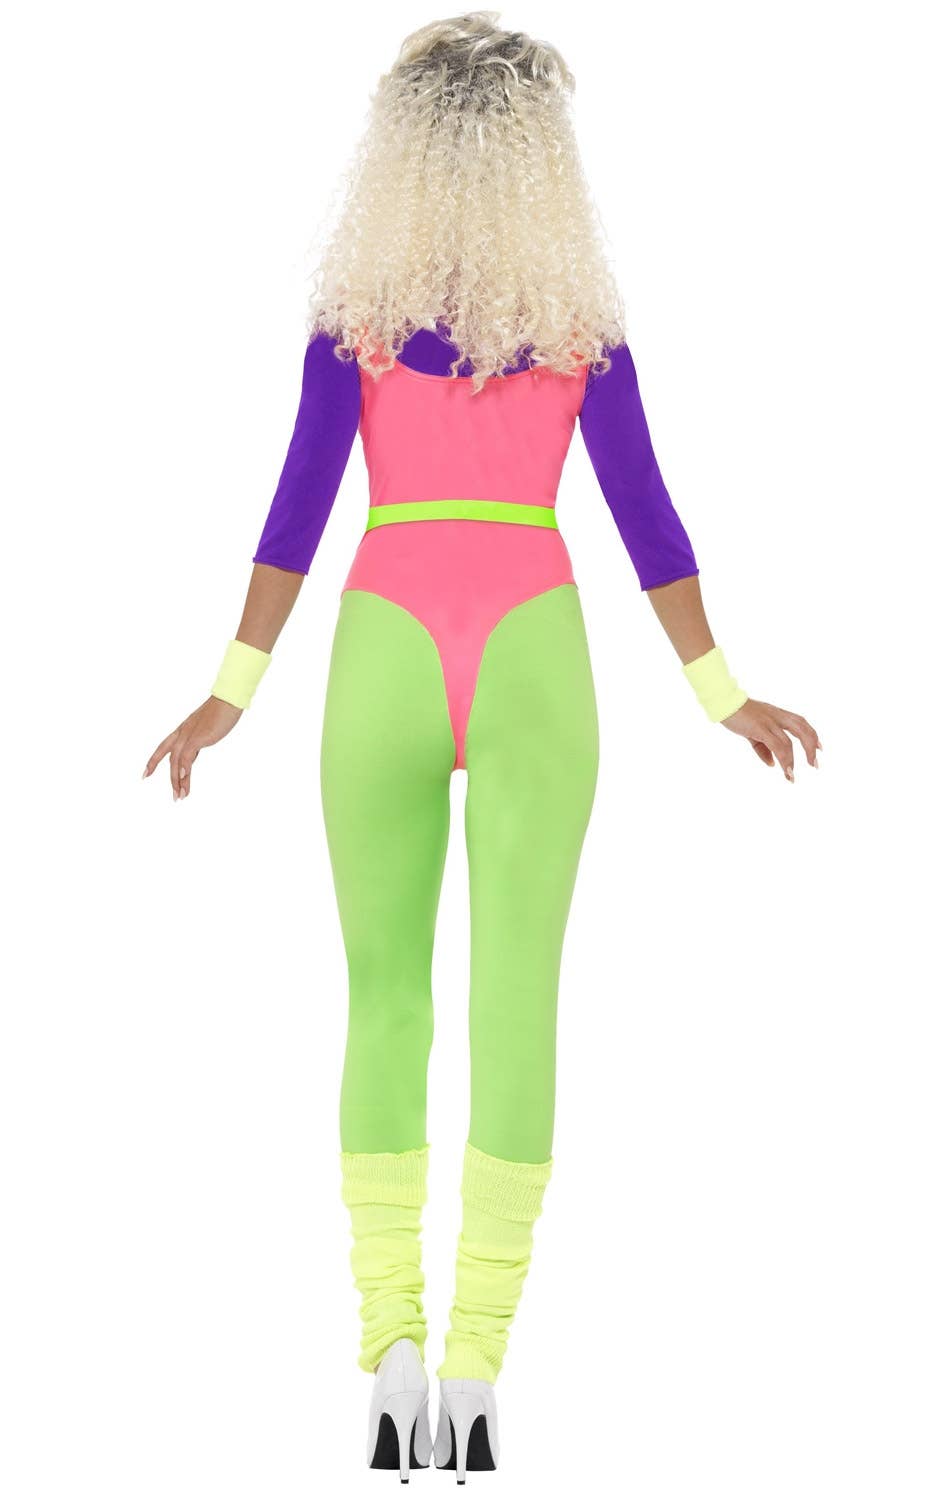 Aerobic Instructor 70s Fashion for Women Costume - Back Image